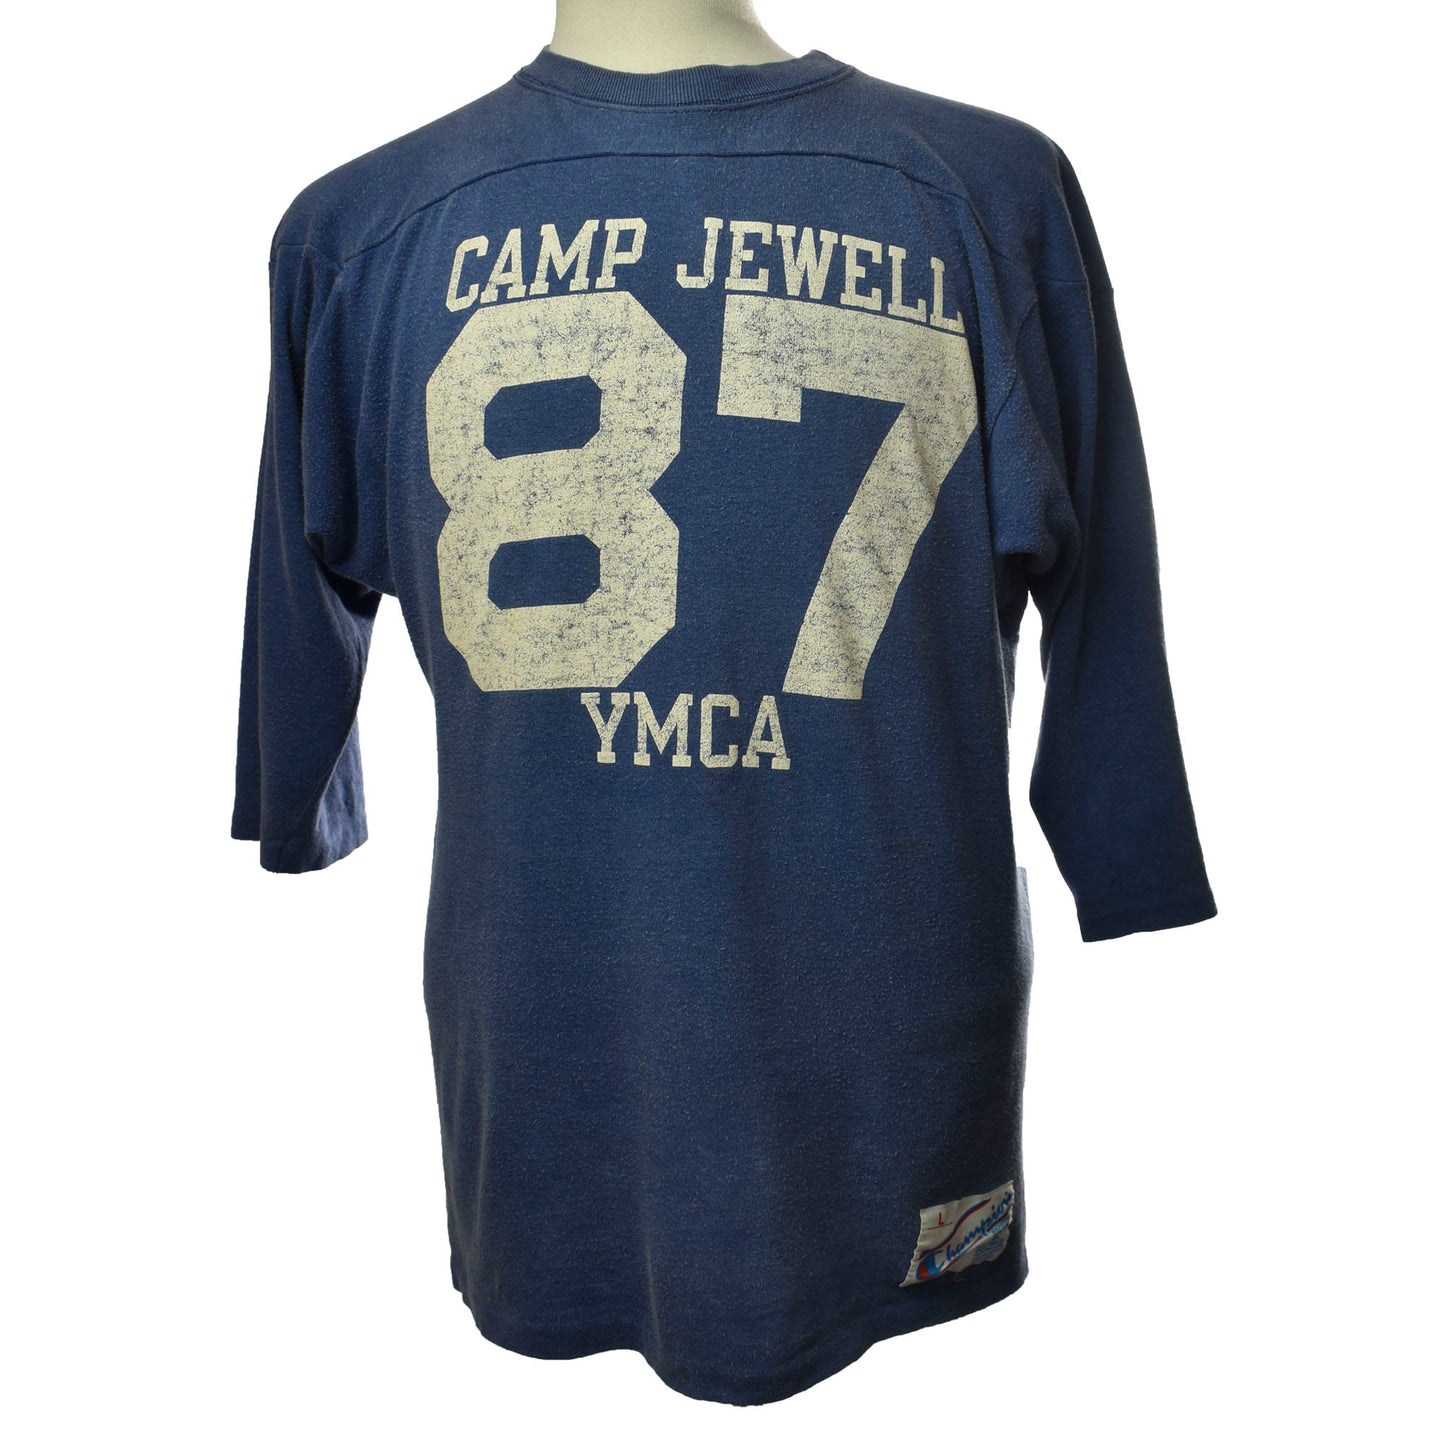 Vintage 80s Champion Camp Jewell YMCA Size L Made in USA 3/4 Sleeve Sweatshirt